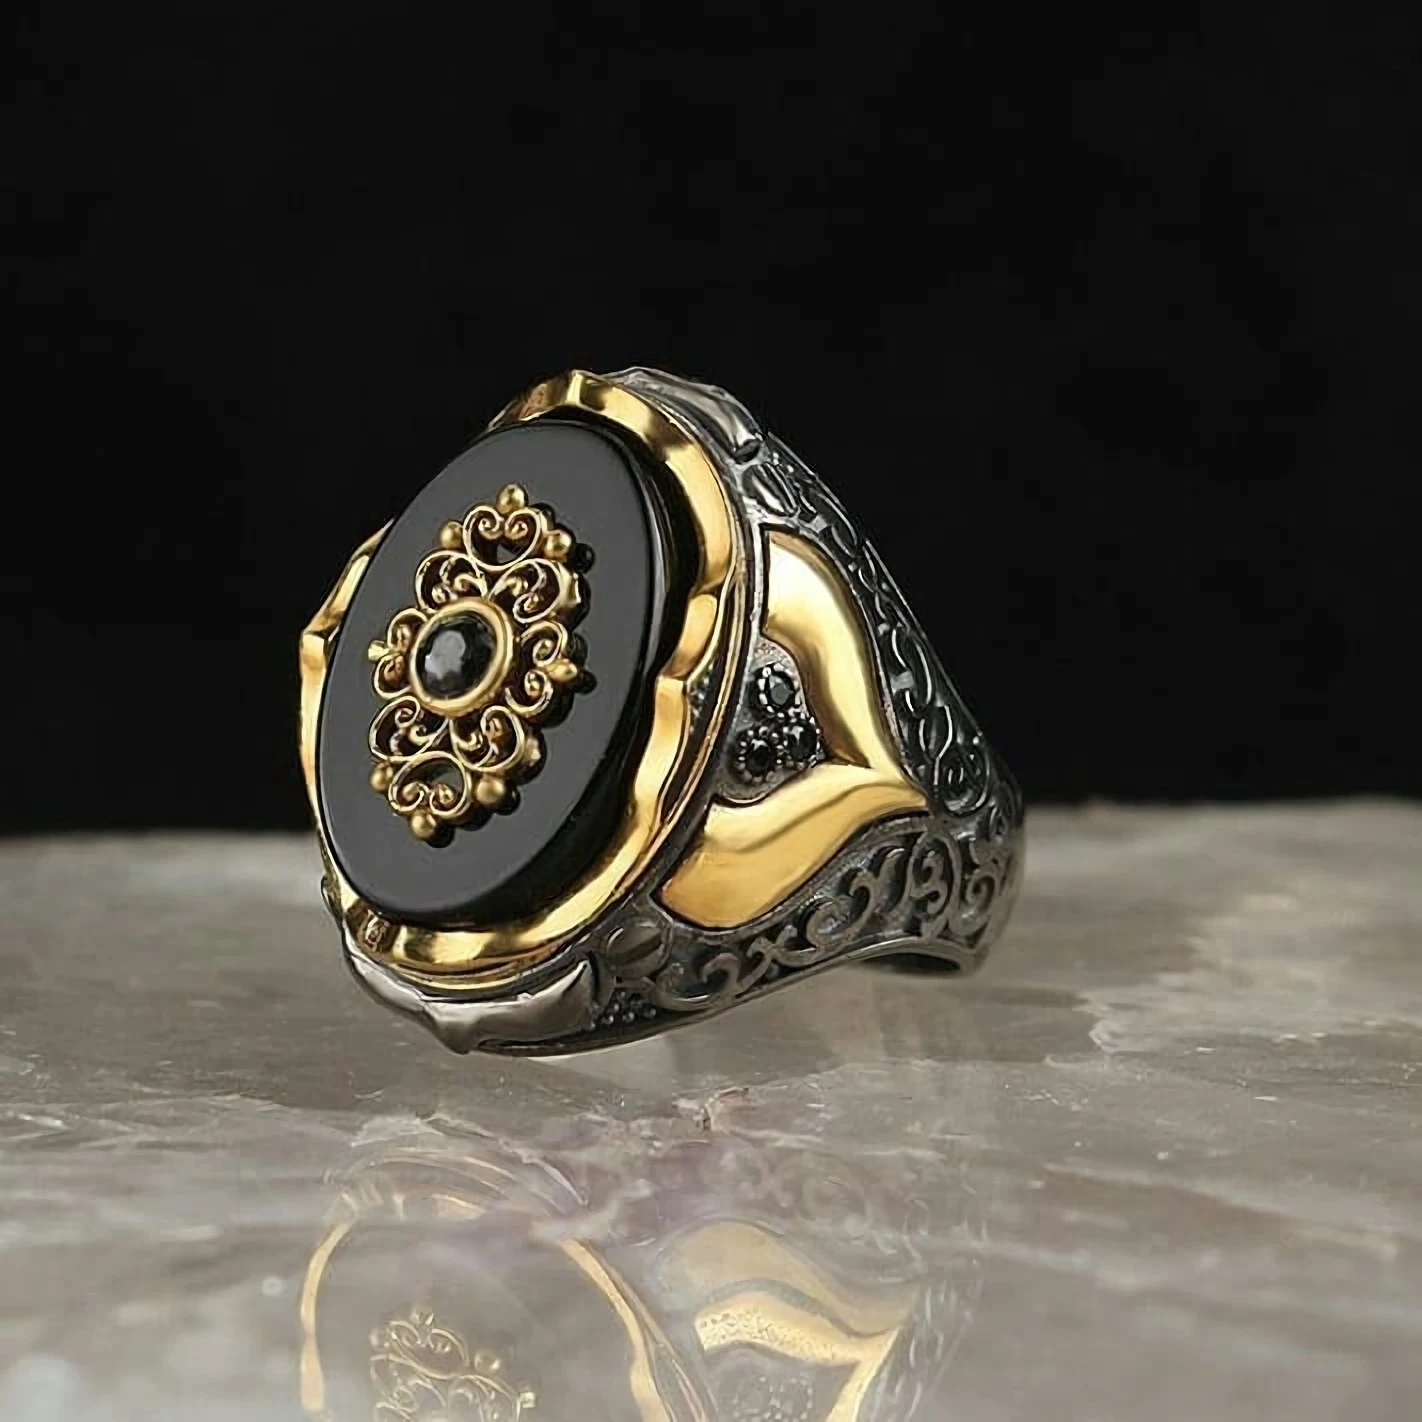 Punk Men's 925 Silver Round Onyx Gold Plated Black Ring Fashion Pattern Inlaid Gemstone Jewelry Party Birthstone Band